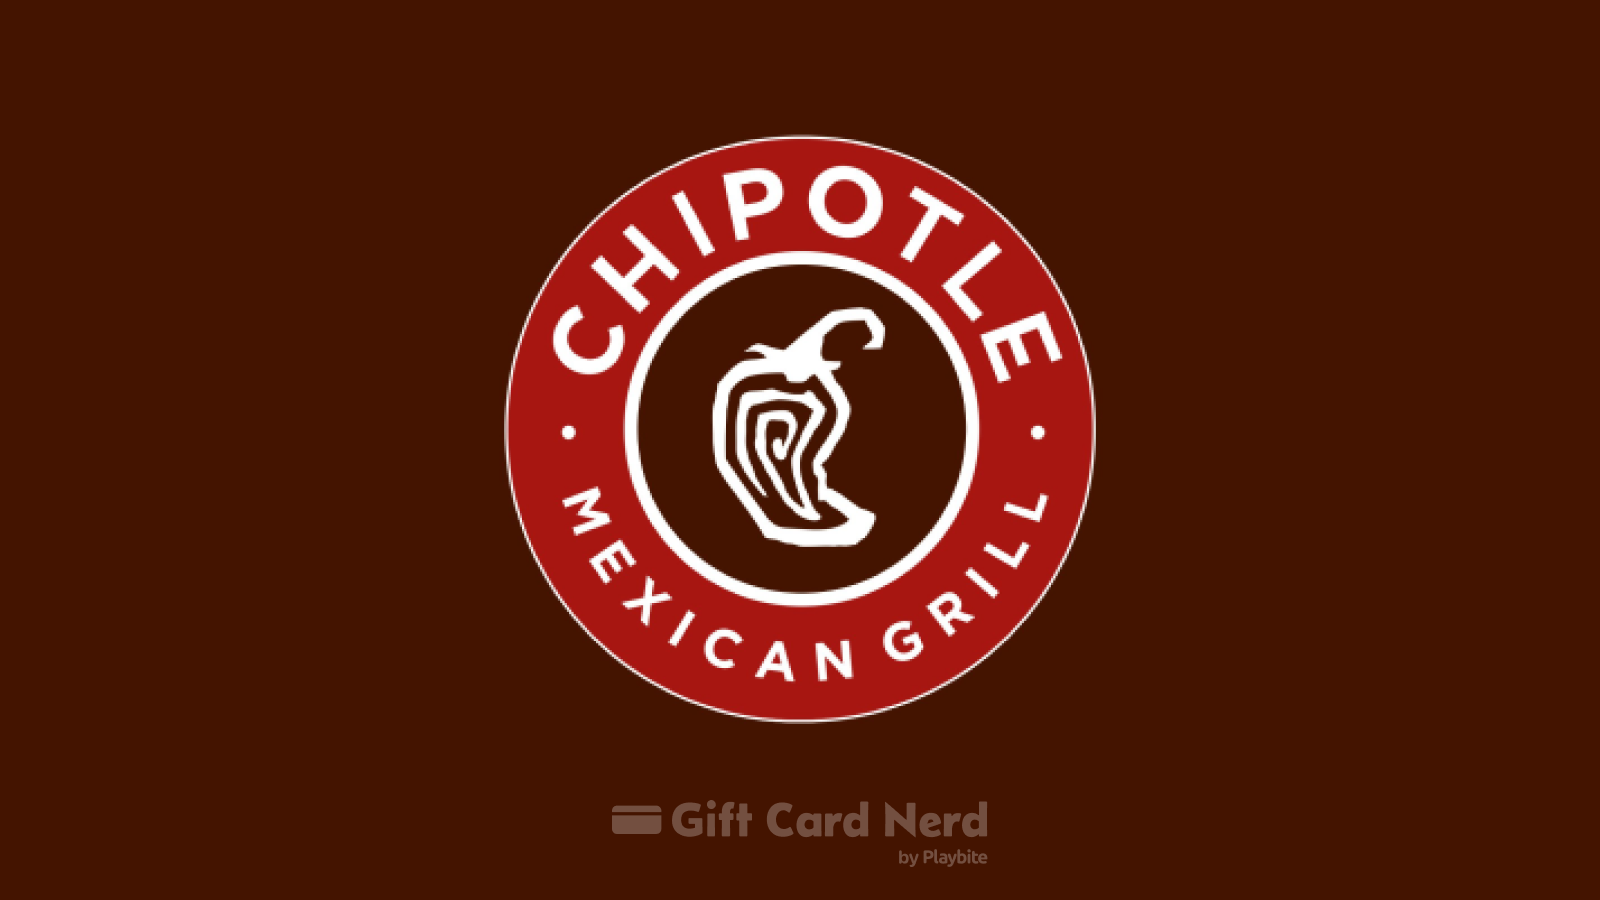 Can I Use a Chipotle Gift Card on Venmo?